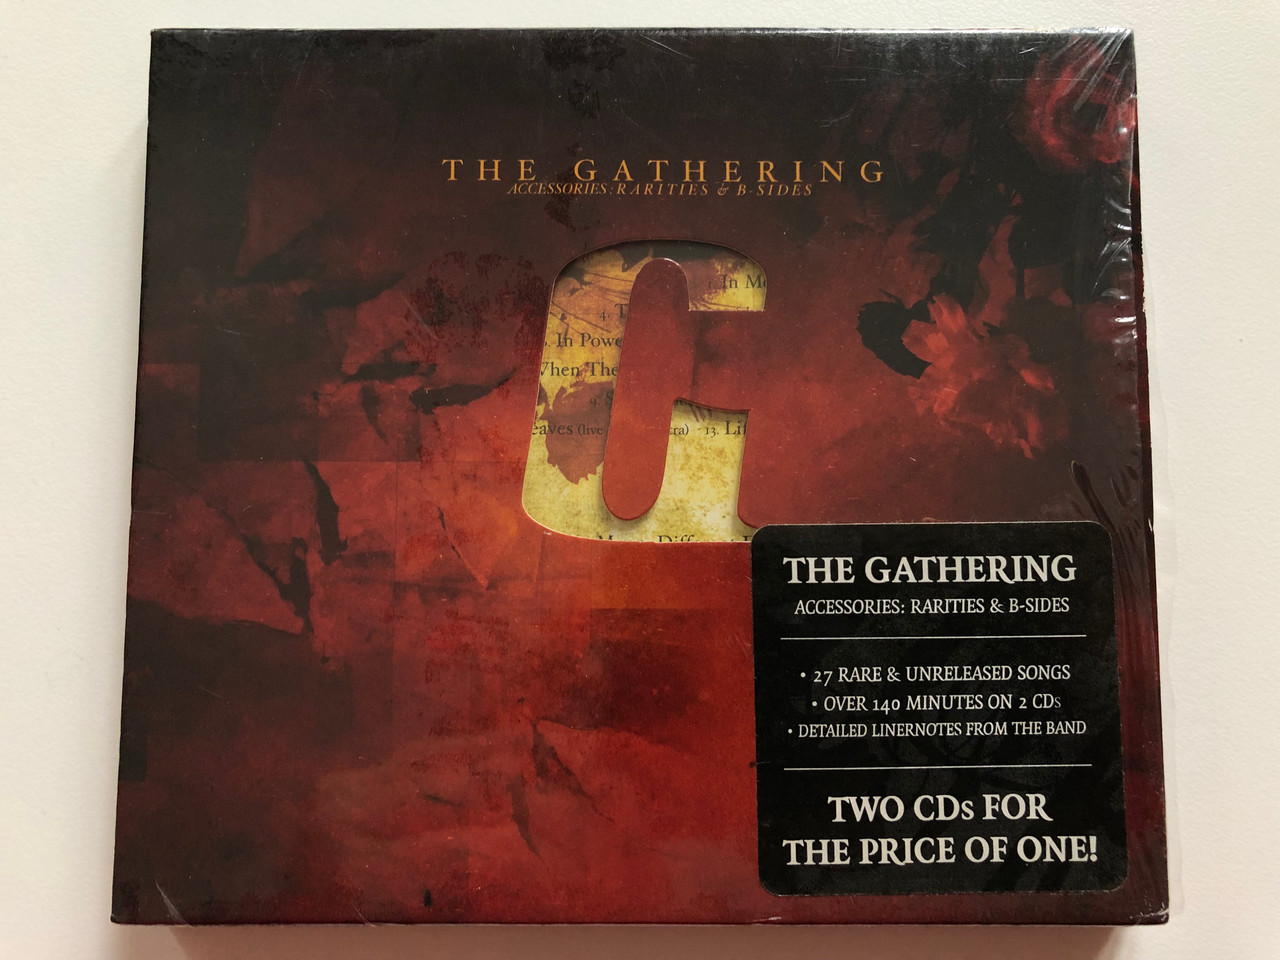 https://cdn10.bigcommerce.com/s-62bdpkt7pb/products/0/images/207862/The_Gathering_Accessories_Rarities_B-Sides_27_Rare_Unreleased_Songs_Over_140_Minutes_On_2_CDs_Detailed_Linernotes_From_The_Band_Two_CDs_For_The_Price_Of_One_Century_Media_2x_Audio_1__34066.1642500484.1280.1280.JPG?c=2&_gl=1*41d5v*_ga*MjA2NTIxMjE2MC4xNTkwNTEyNTMy*_ga_WS2VZYPC6G*MTY0MjQ4NzMxNy4yNjUuMS4xNjQyNDk5ODgyLjU4